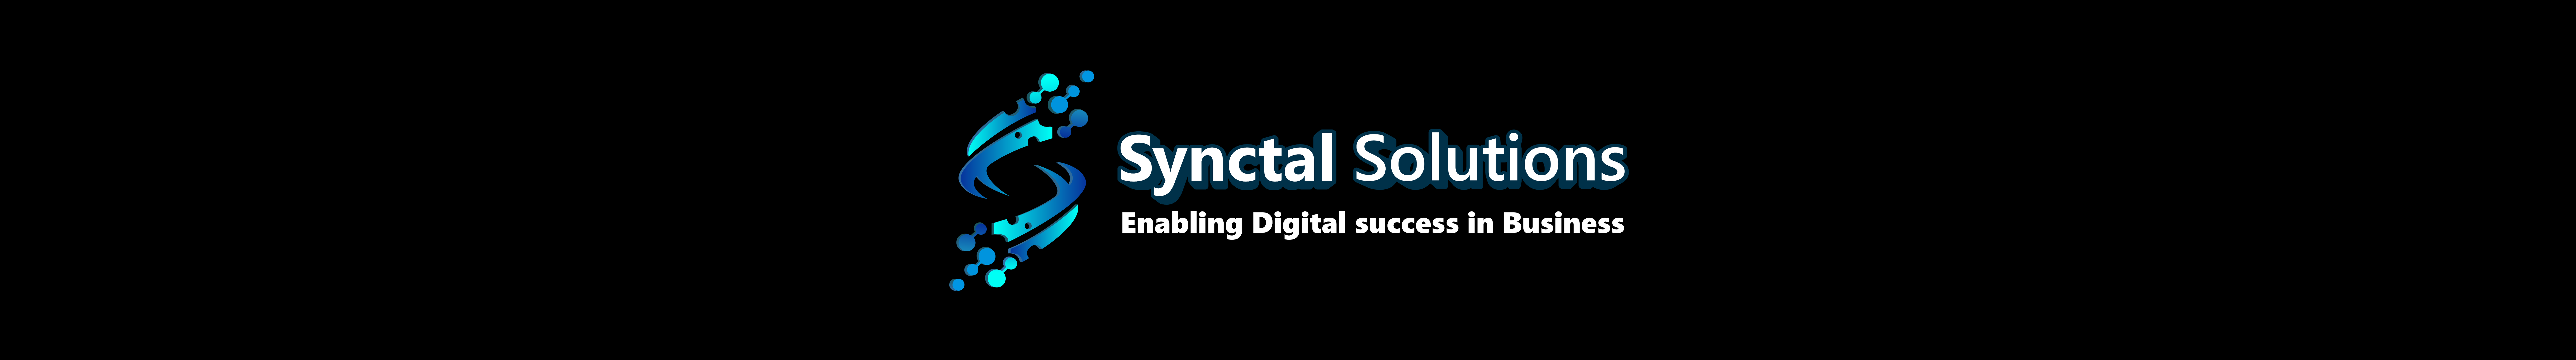 Synctal Solutions's profile banner